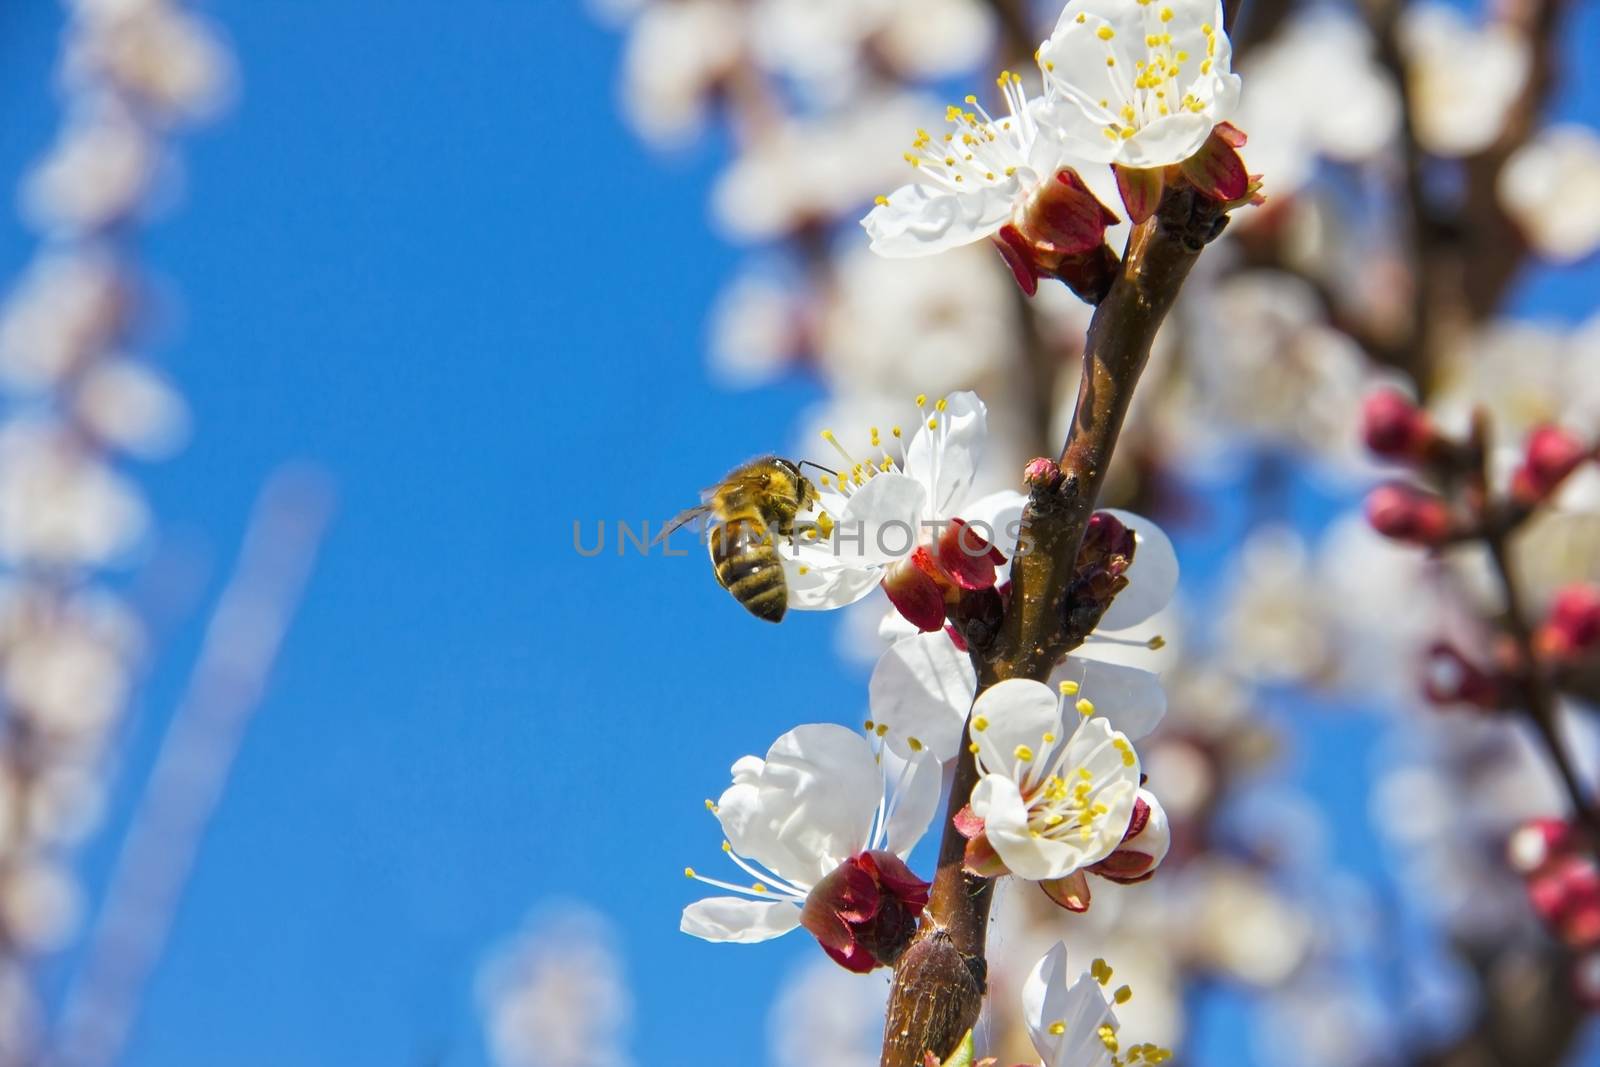 Bees pollinate young tree flowers in the garden, bee collects po by KoliadzynskaIryna